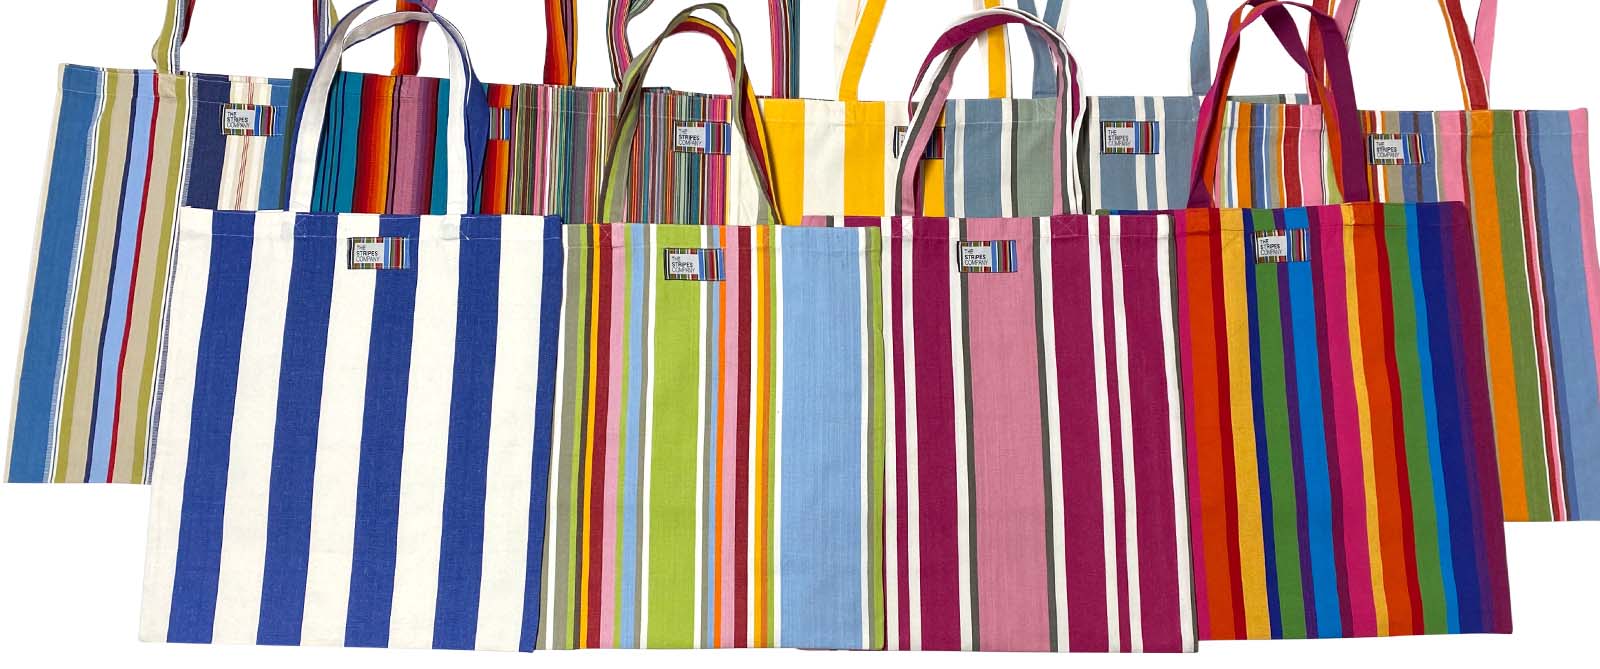 Striped Tote Bags